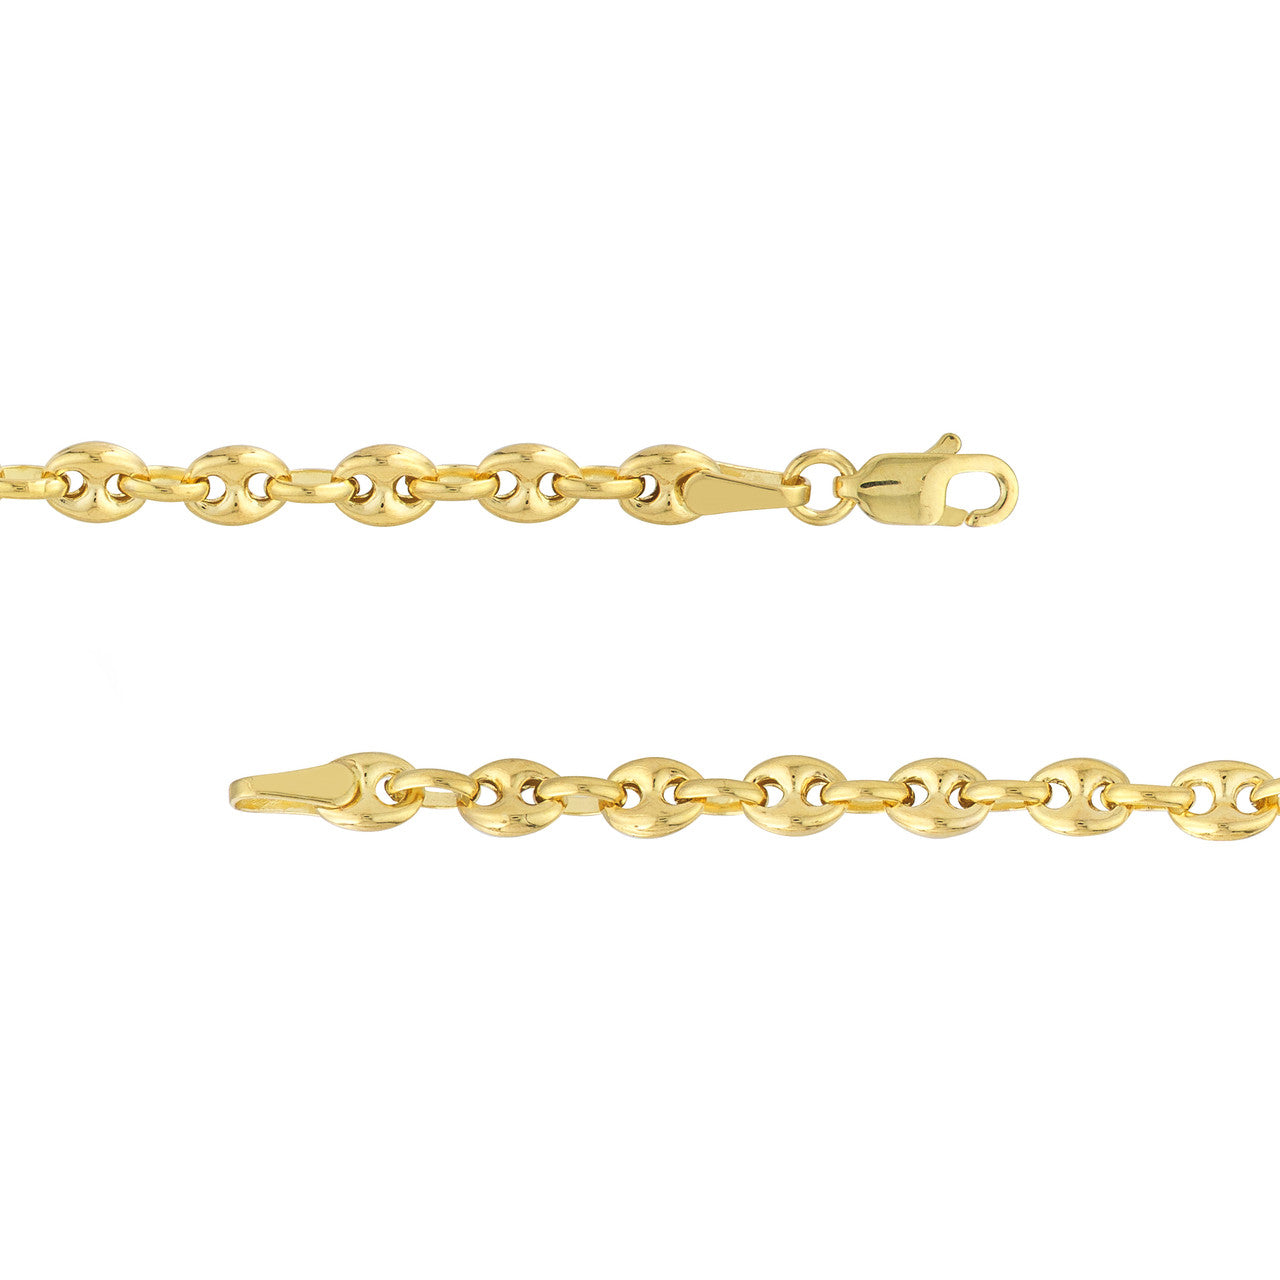 14K Yellow Gold 3.7mm Puff Mariner Bracelet Anklet Choker Necklace Pendant Chain